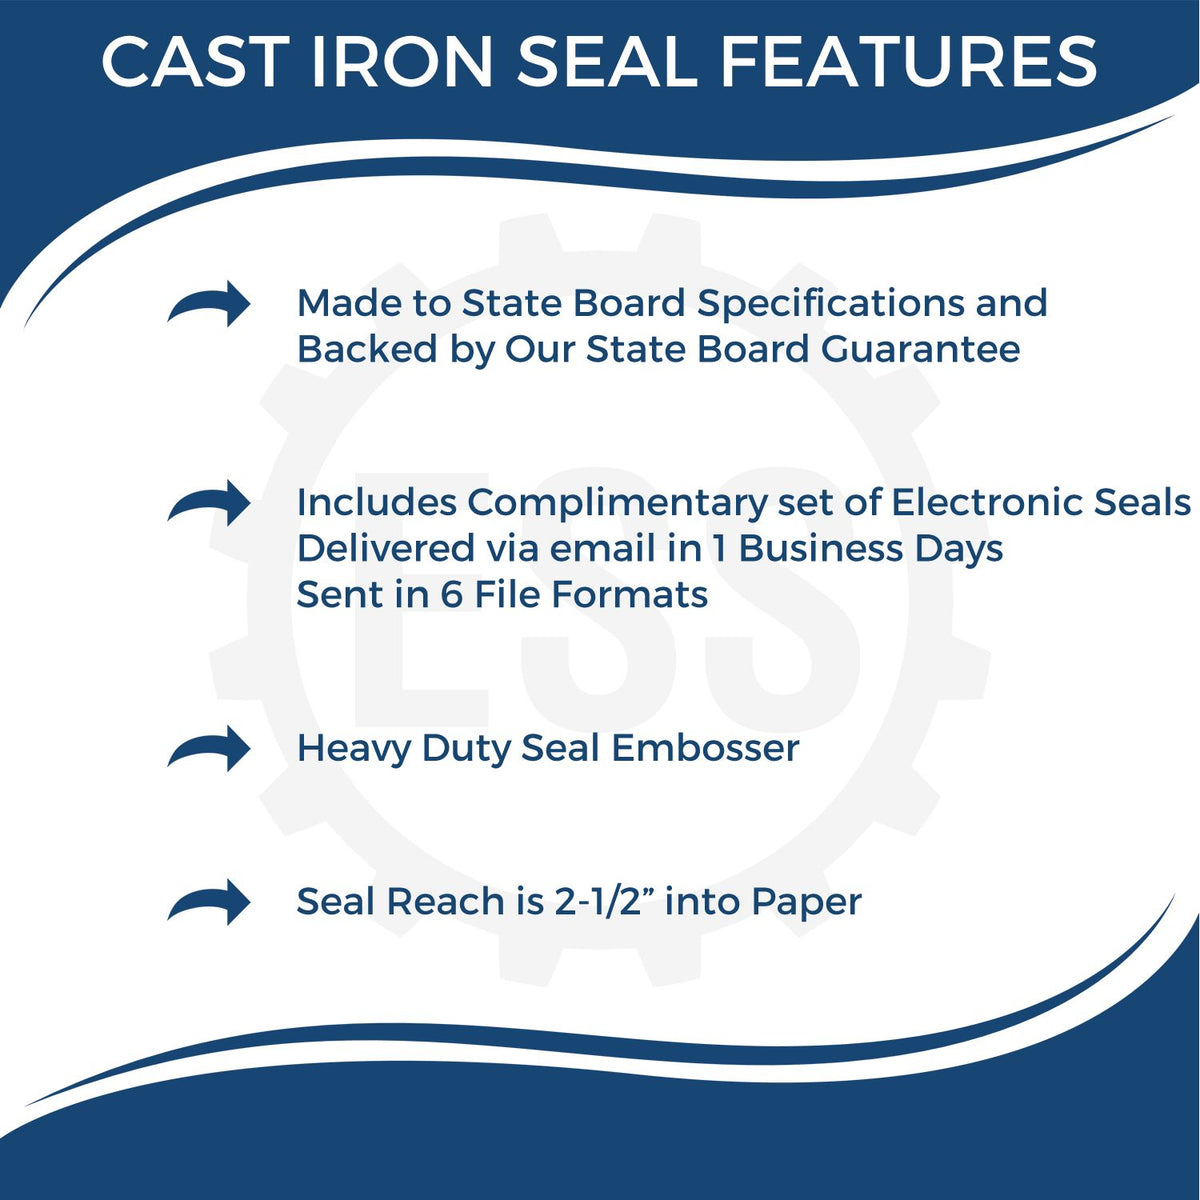 A picture of an infographic highlighting the selling points for the Heavy Duty Cast Iron Minnesota Land Surveyor Seal Embosser